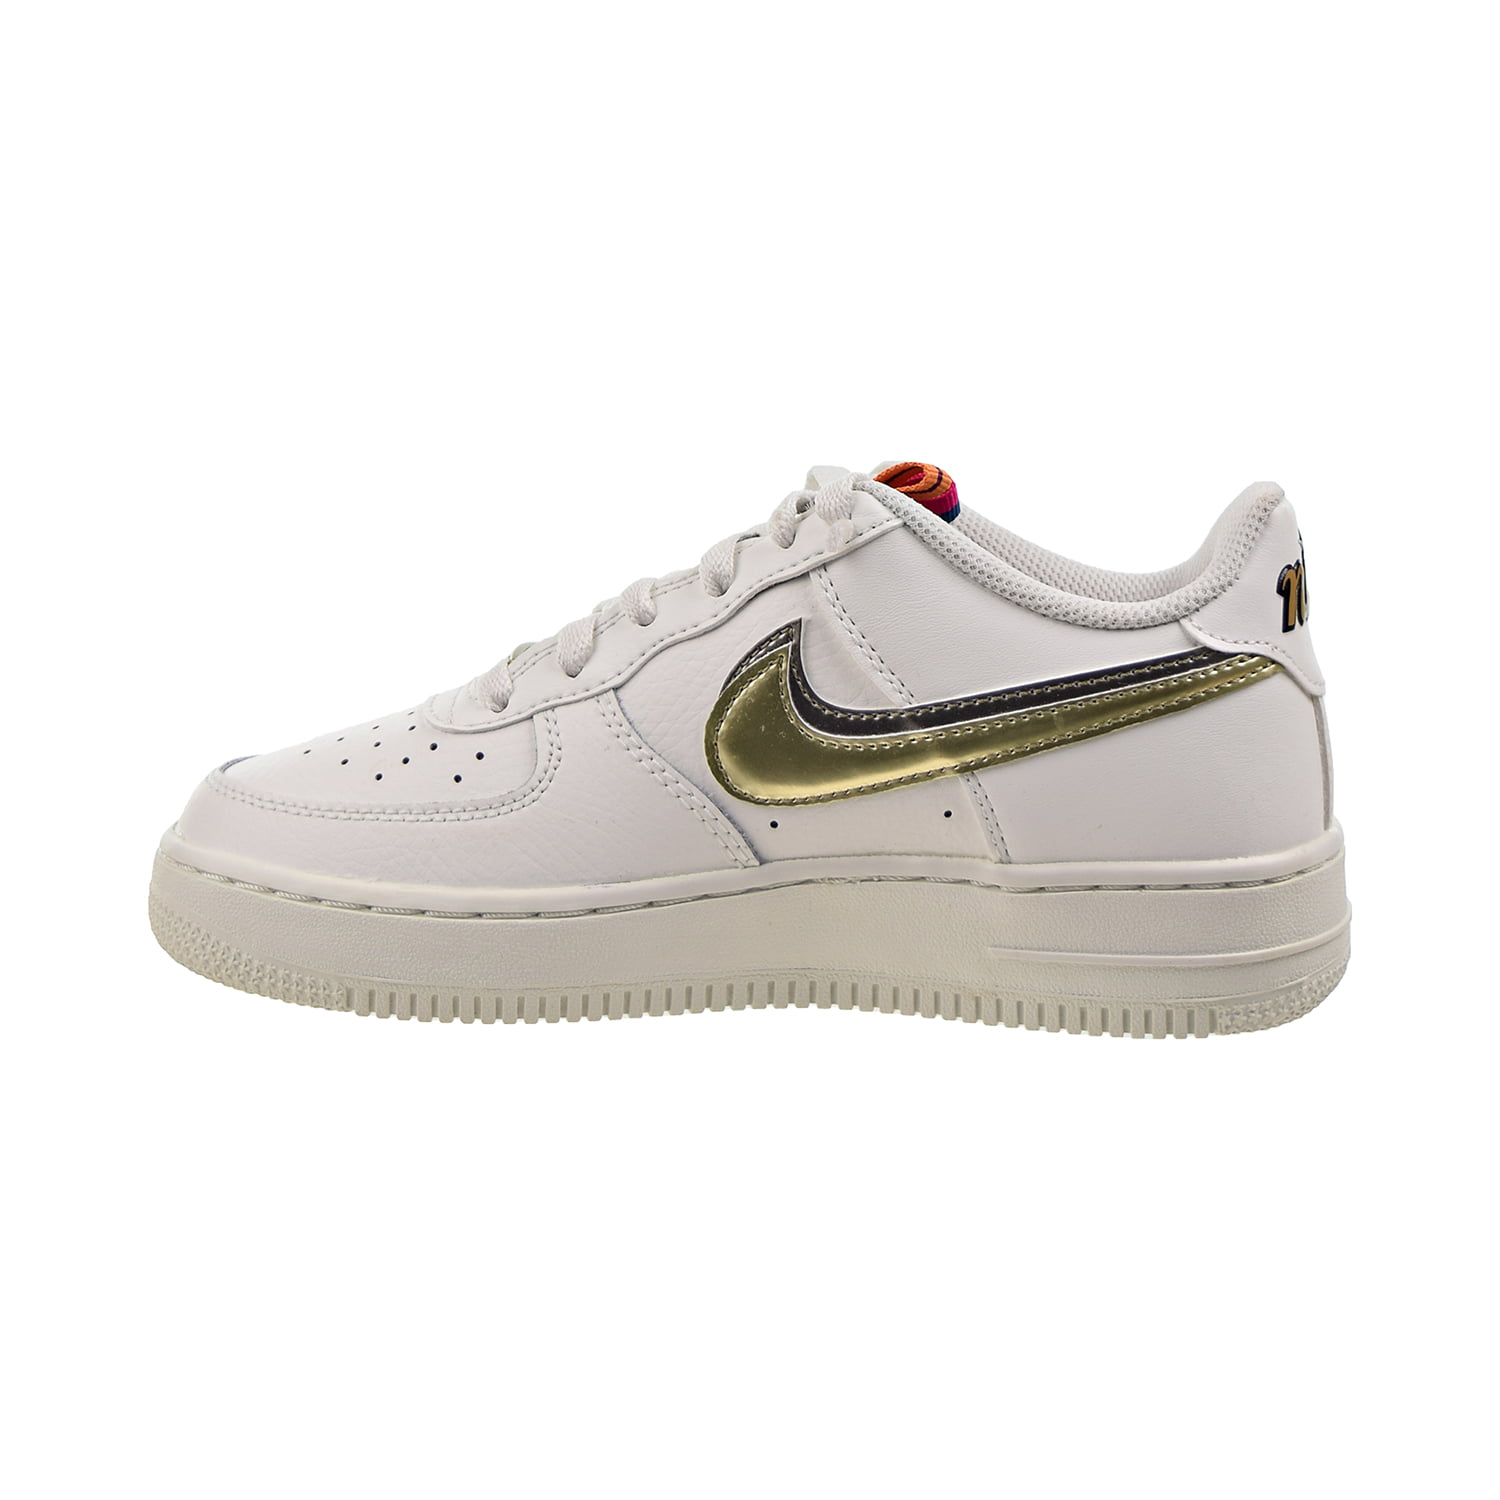  Nike Youth Air Force 1 LV8 GS DH9595 001 - Size 7Y